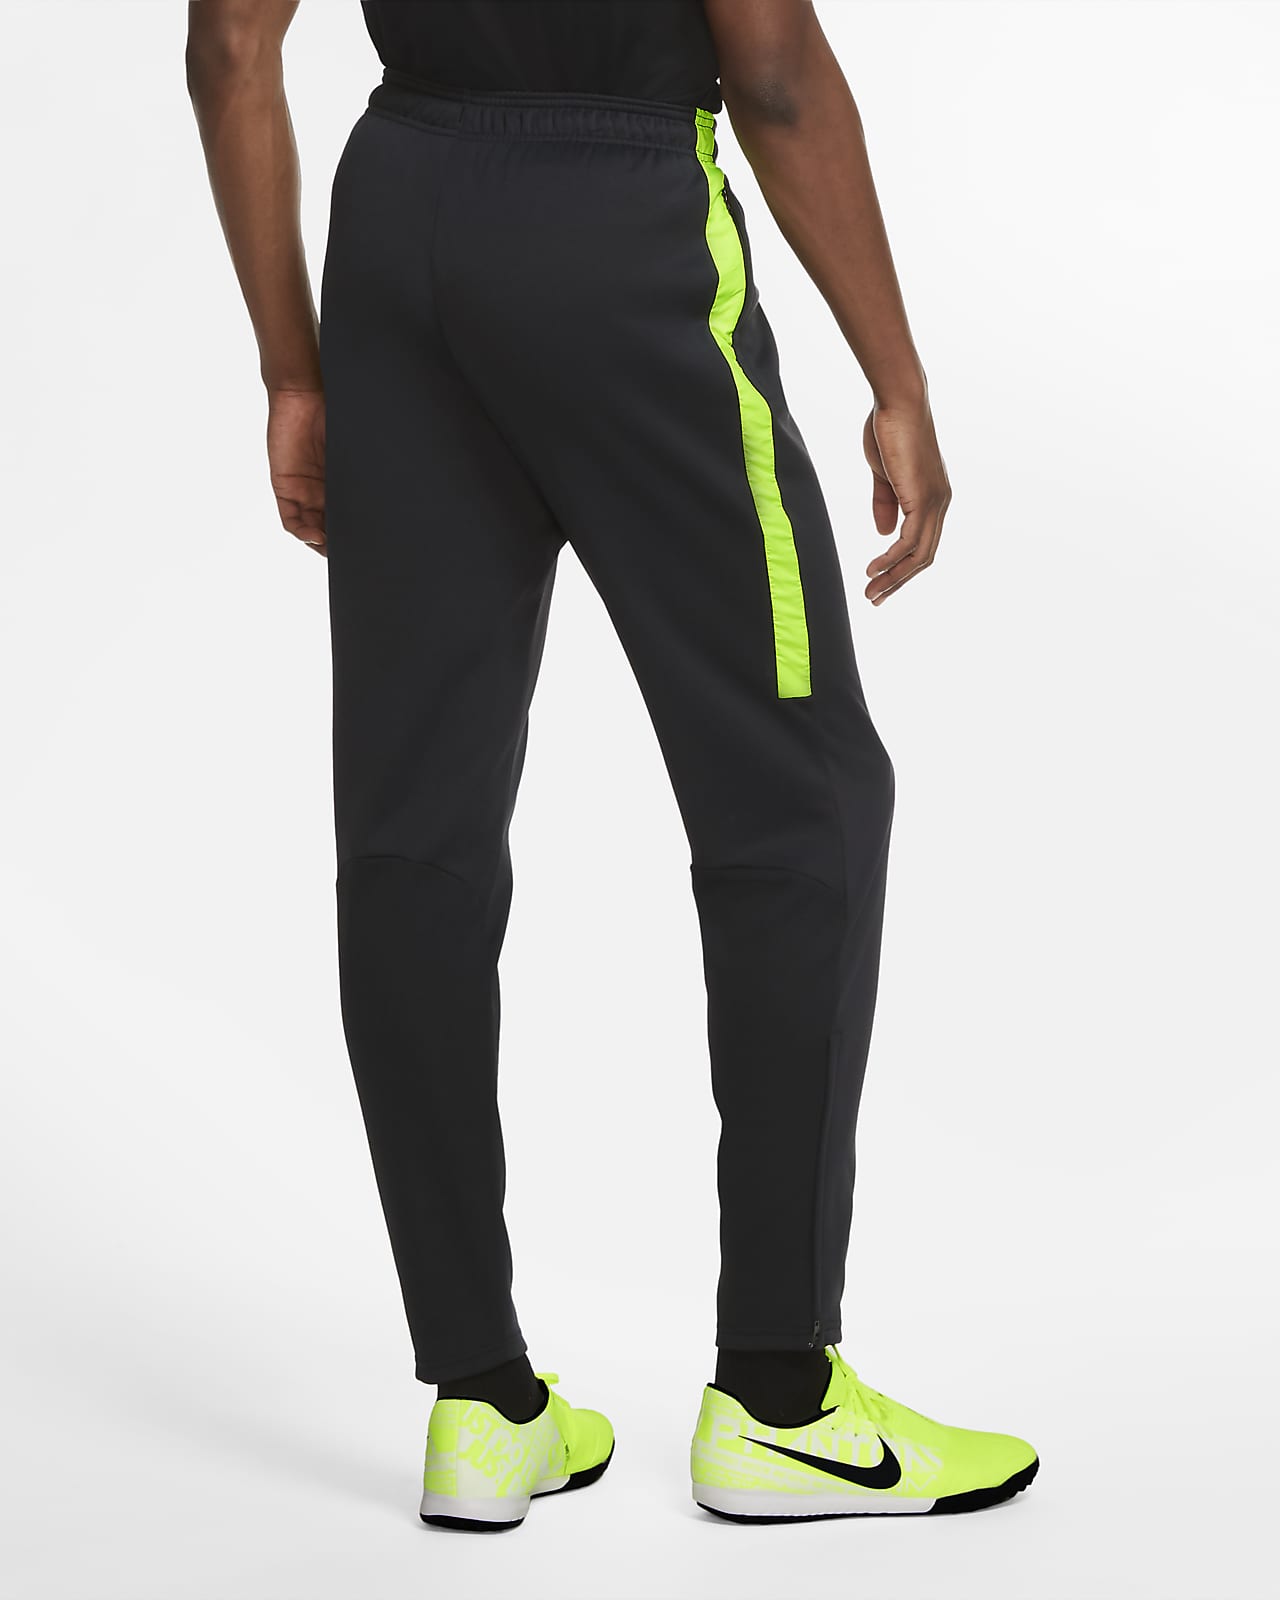 men's nike therma academy soccer training pants